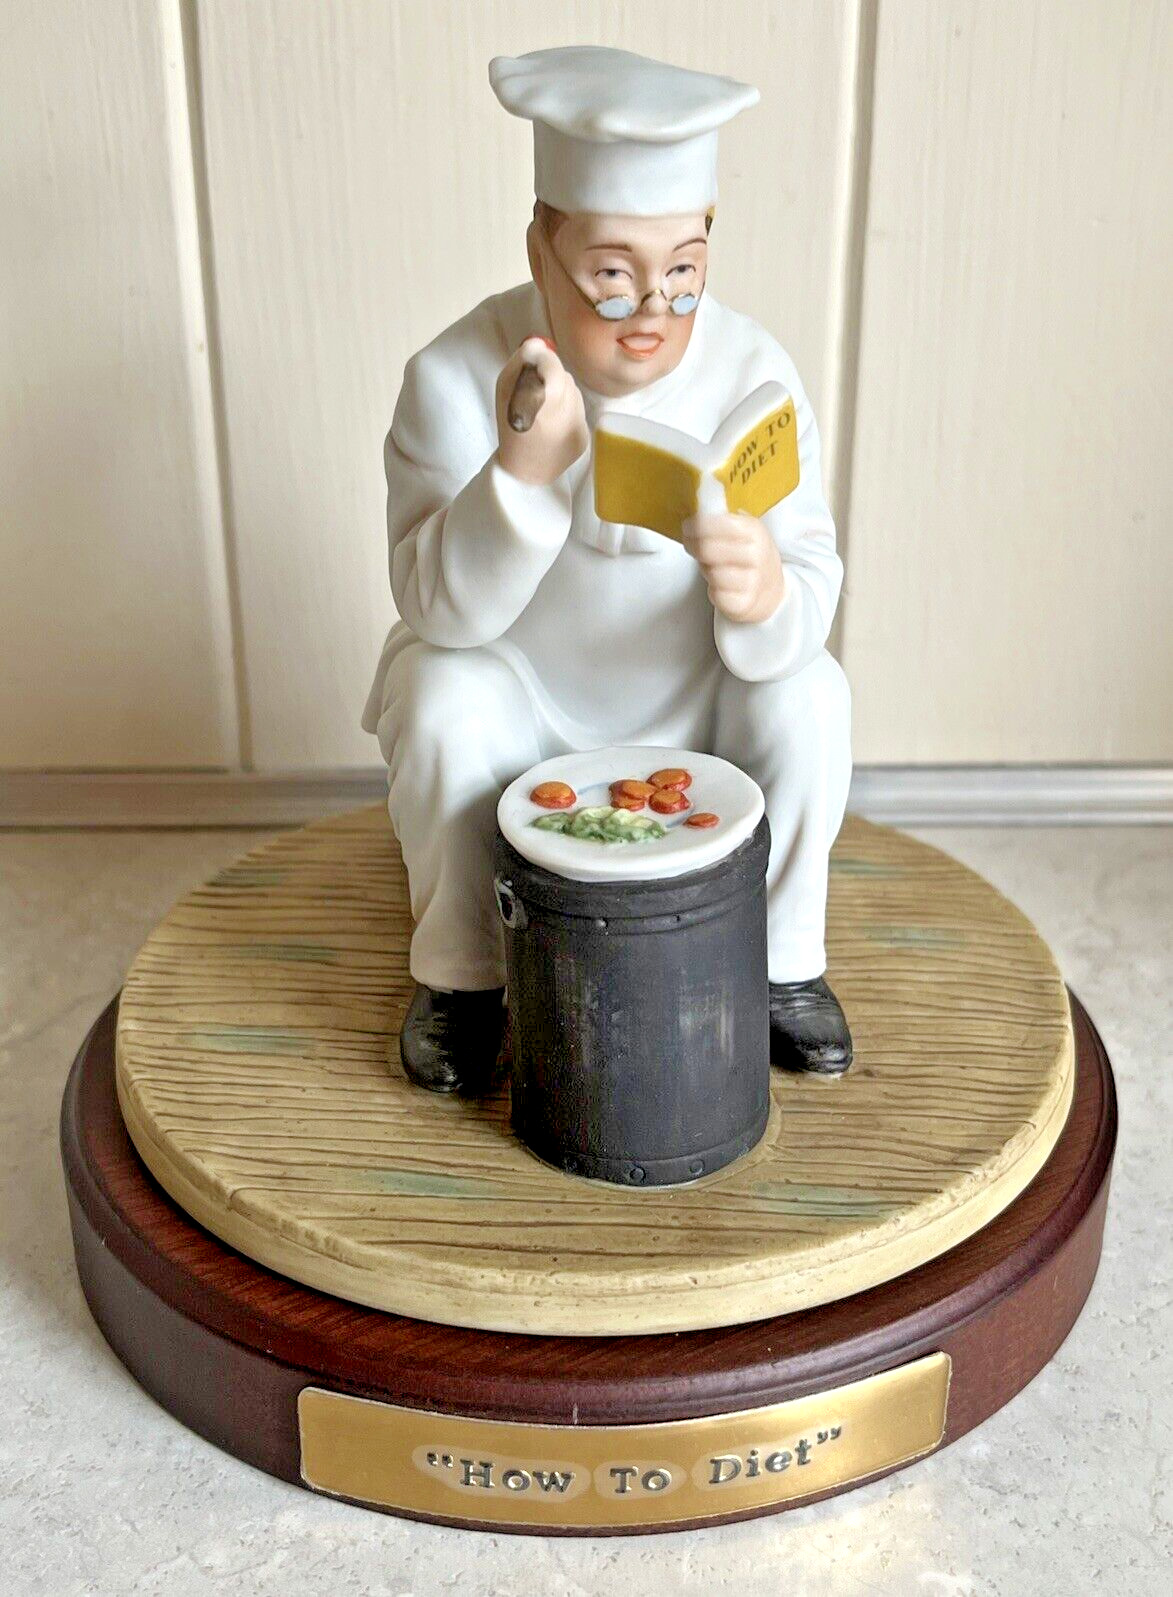 Goebel Norman Rockwell How to Diet Chef Porcelain Figurine Wooden Base Box